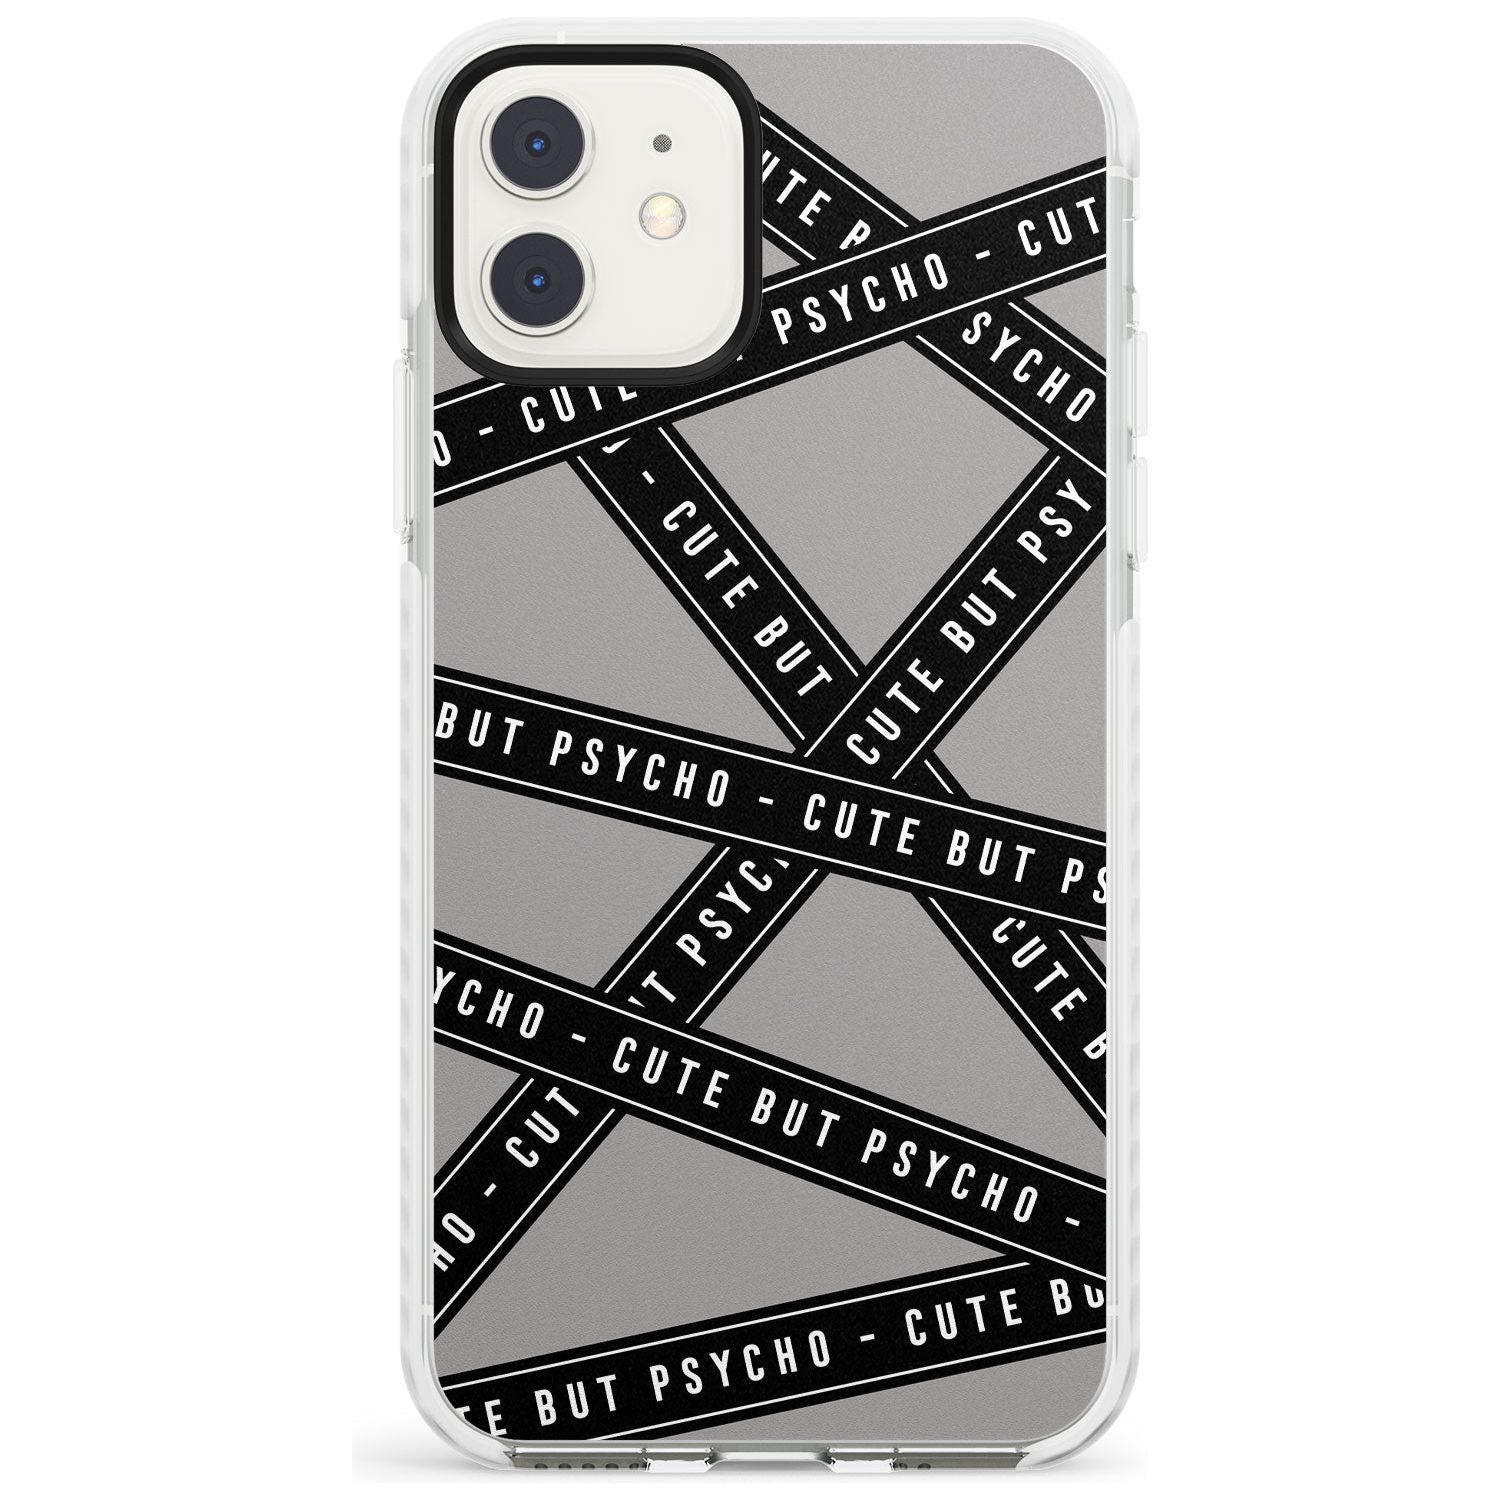 Caution Tape Phrases Cute But Psycho Impact Phone Case for iPhone 11